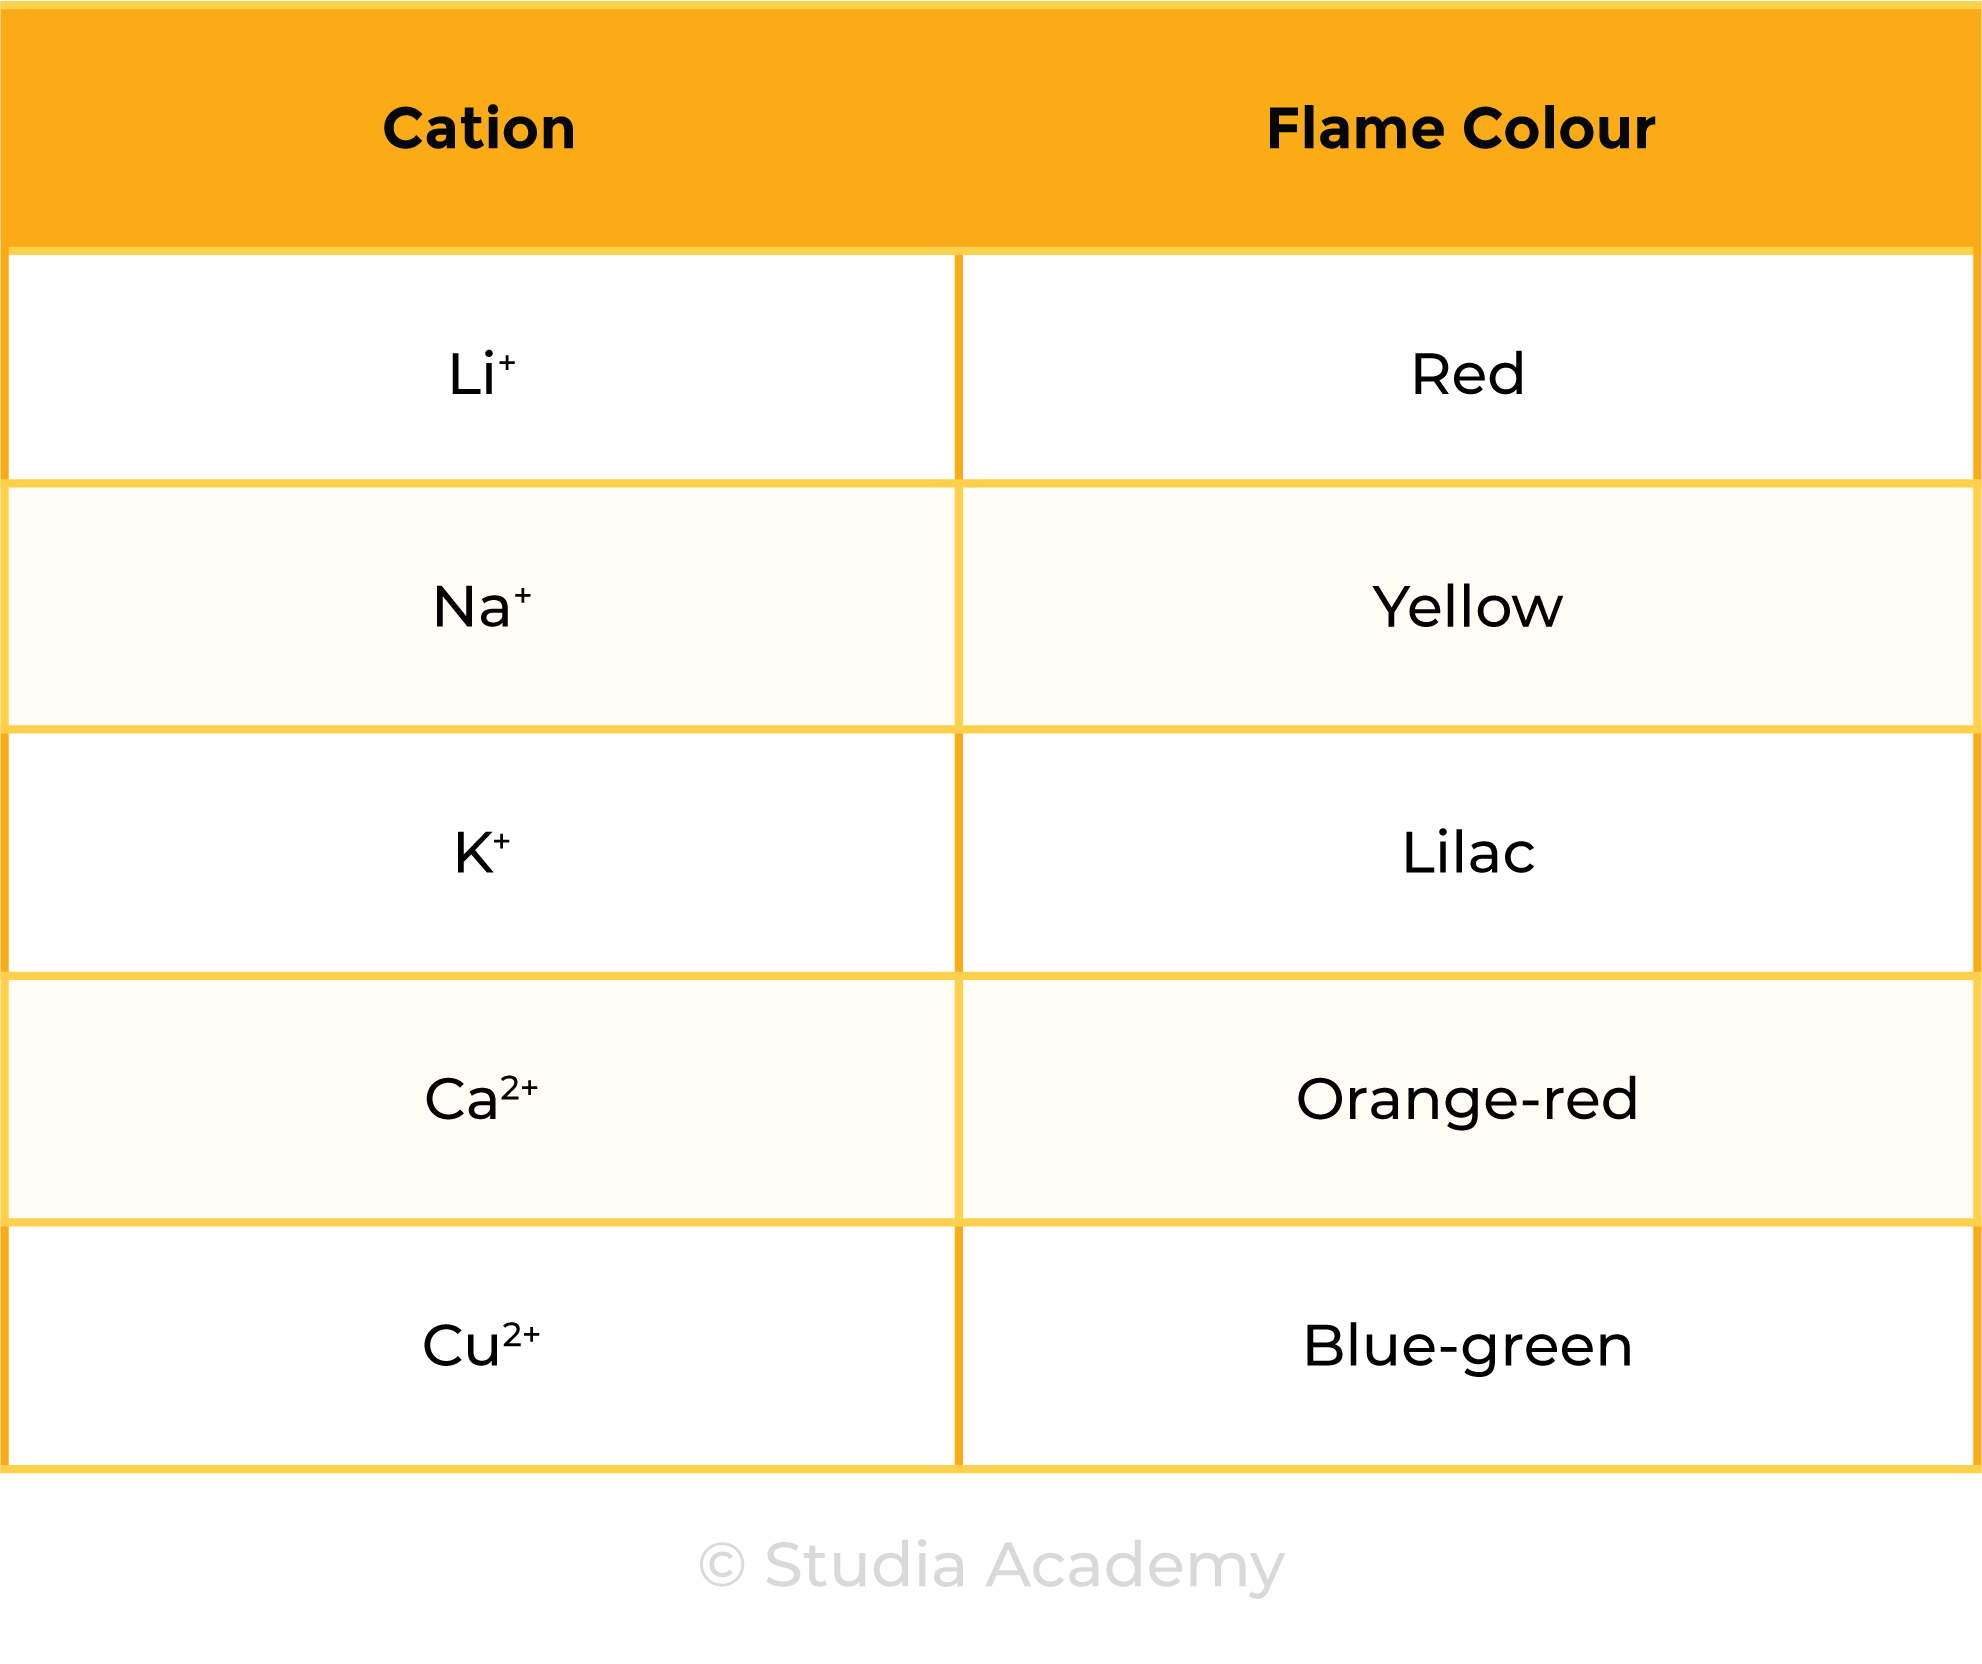 edexcel_igcse_chemistry_topic 17 tables_chemical tests_002_flame tests